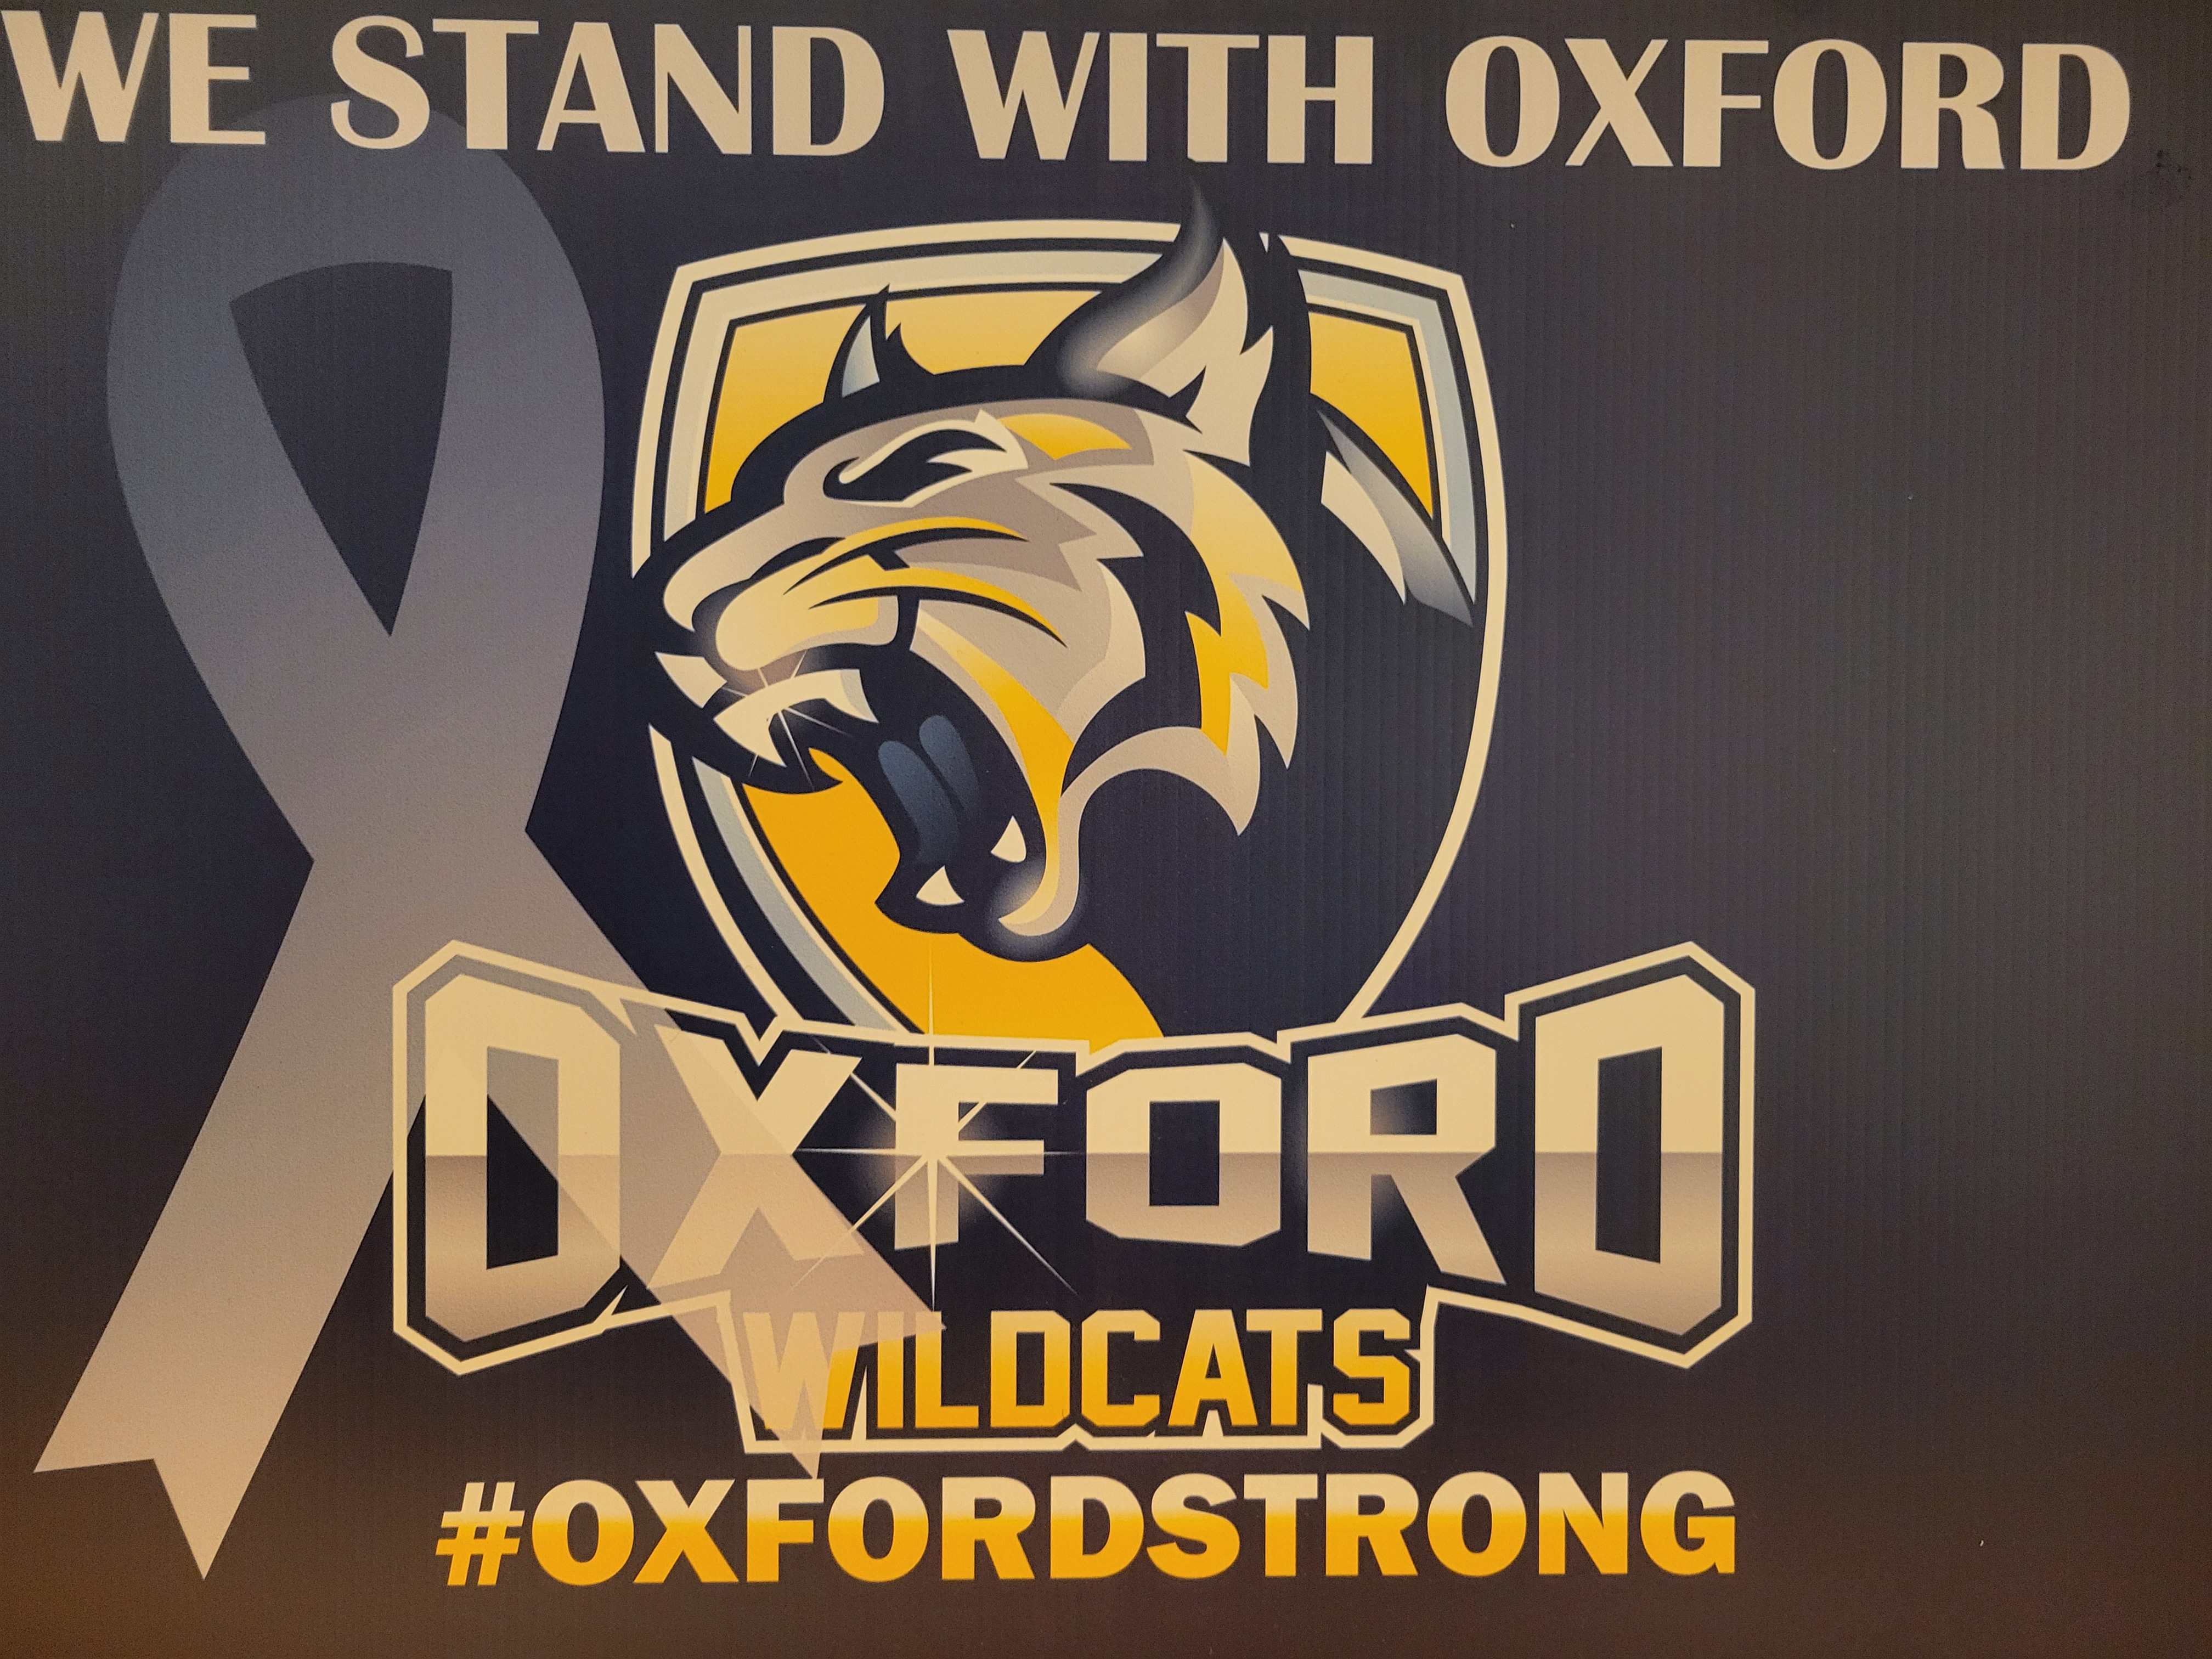 Oxford Strong logo with text saying we stand with Oxford. image of Oxford school logo with wildcat. Overlaid with a ribbon.